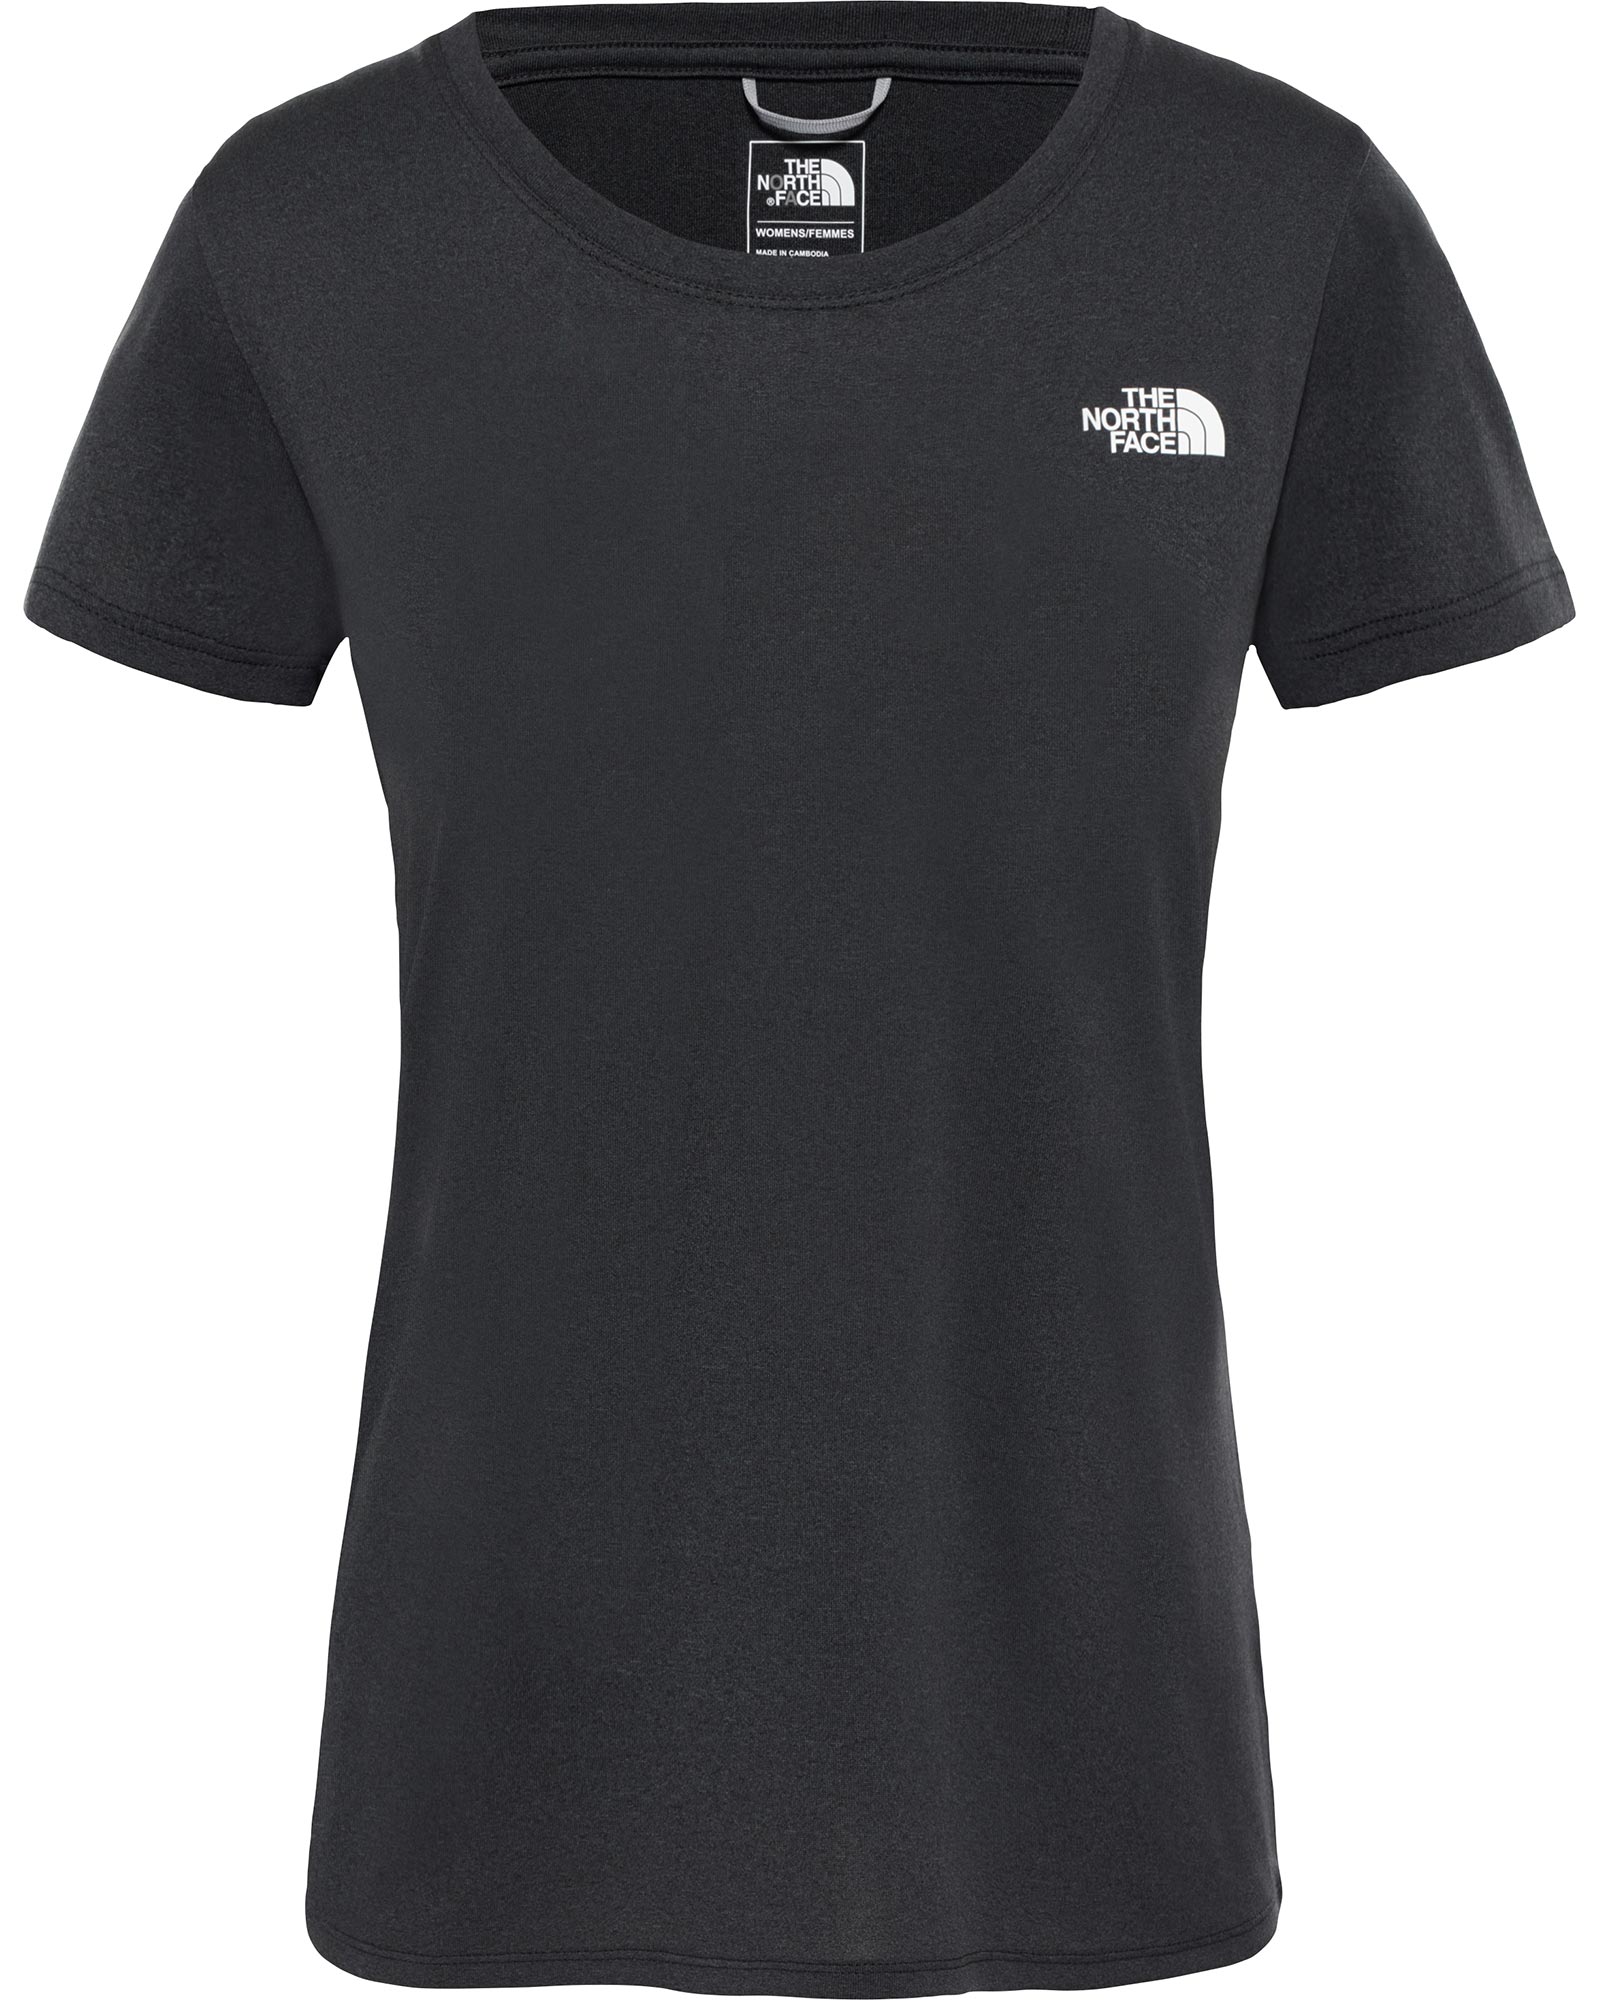 The North Face Reaxion Amp Women’s Crew T Shirt - TNF Light Grey Heather M